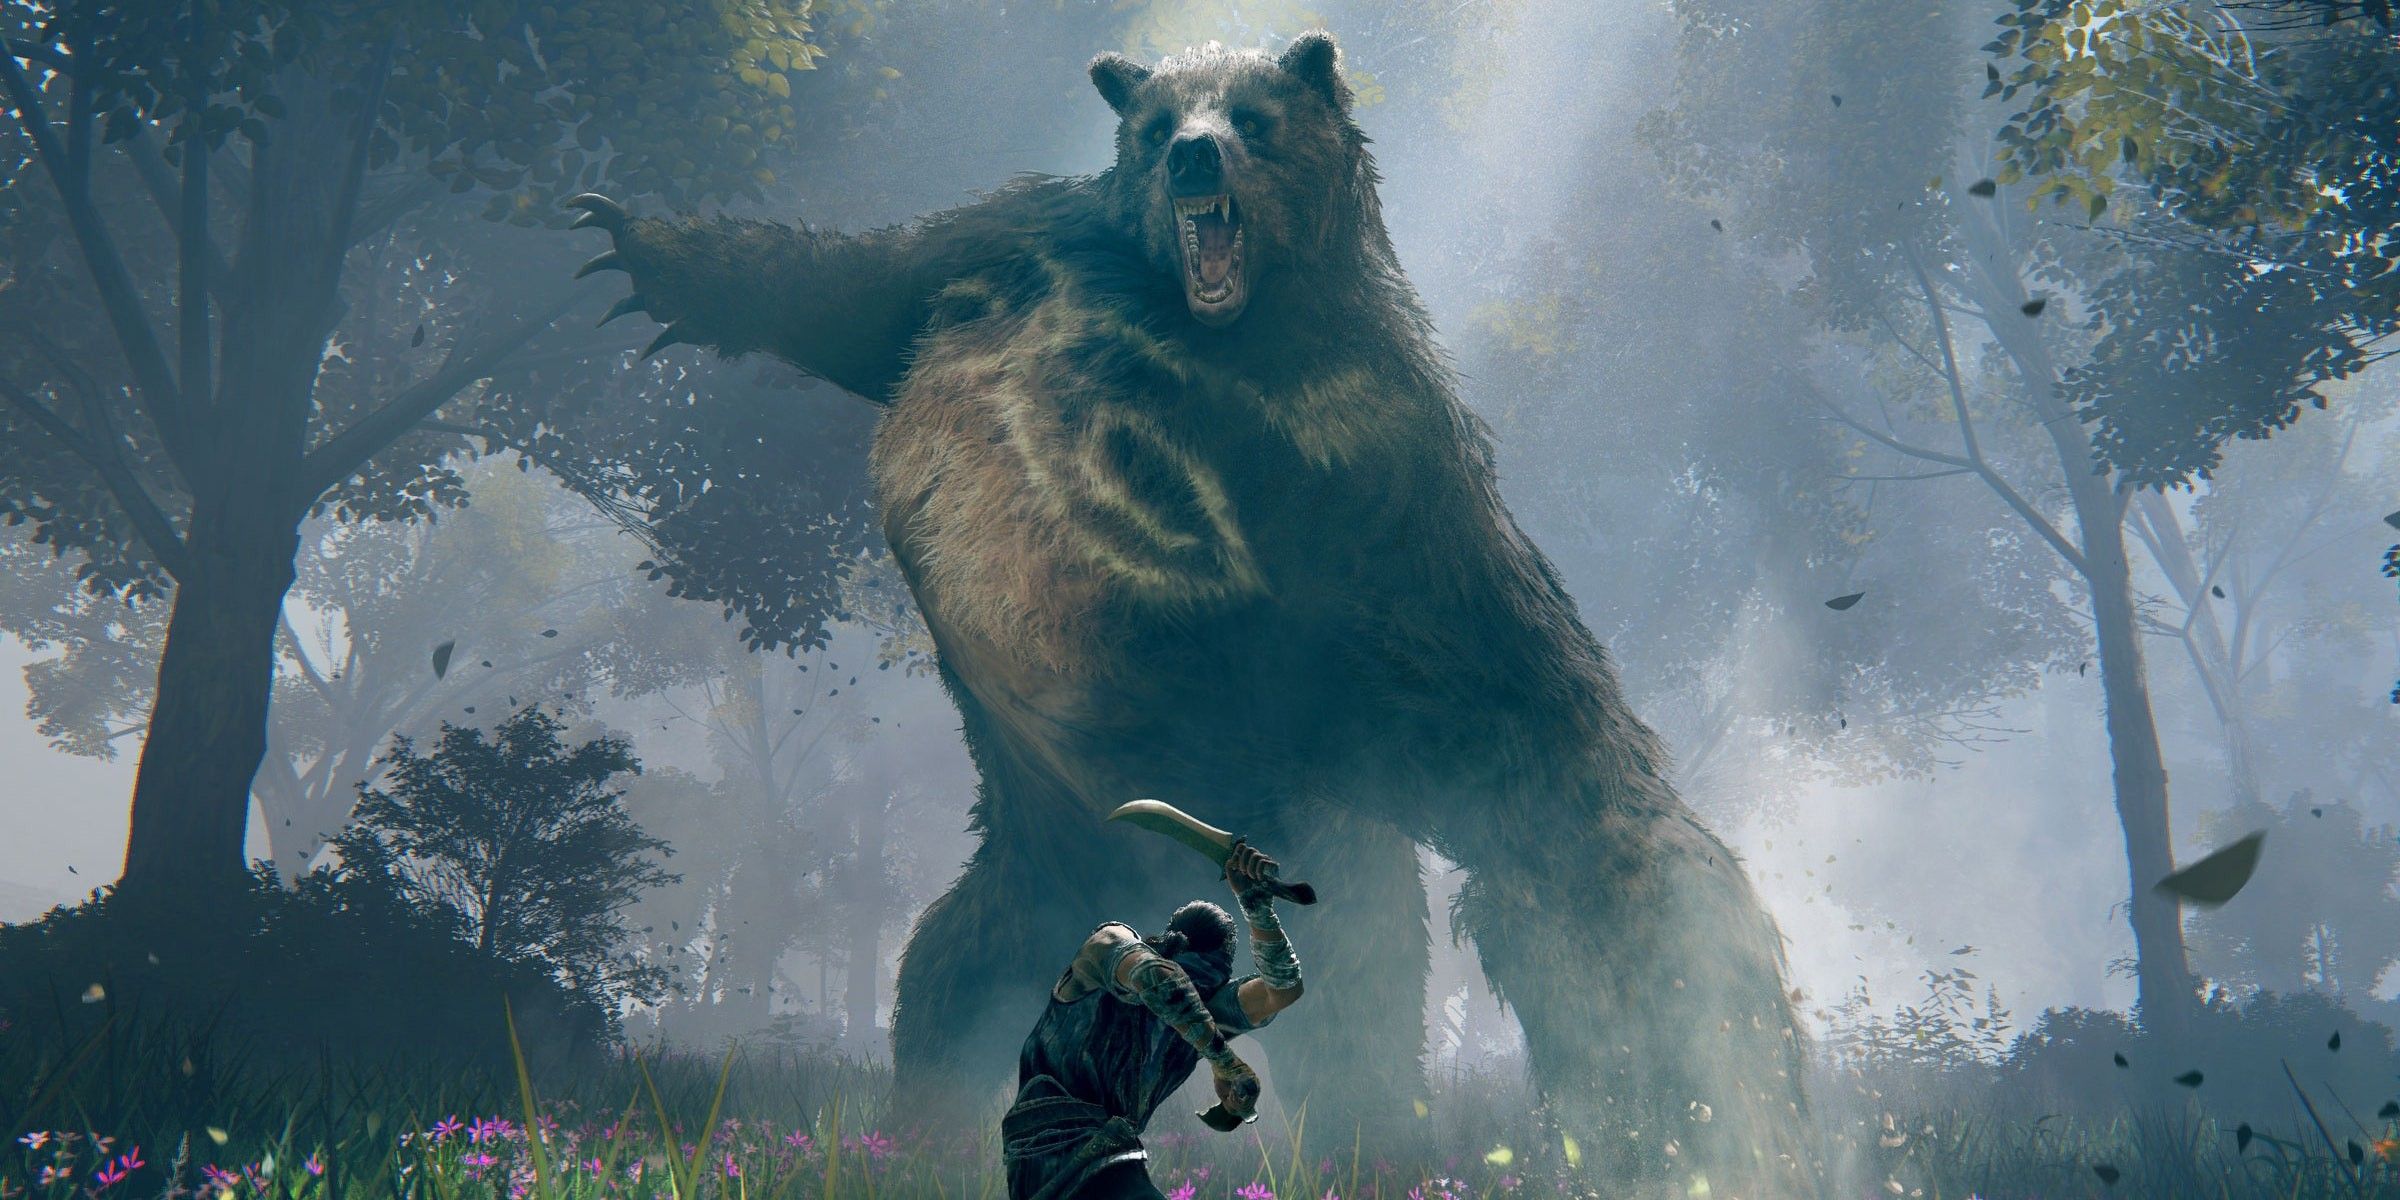 Elden ring screenshot of a player engaging a bear in combat